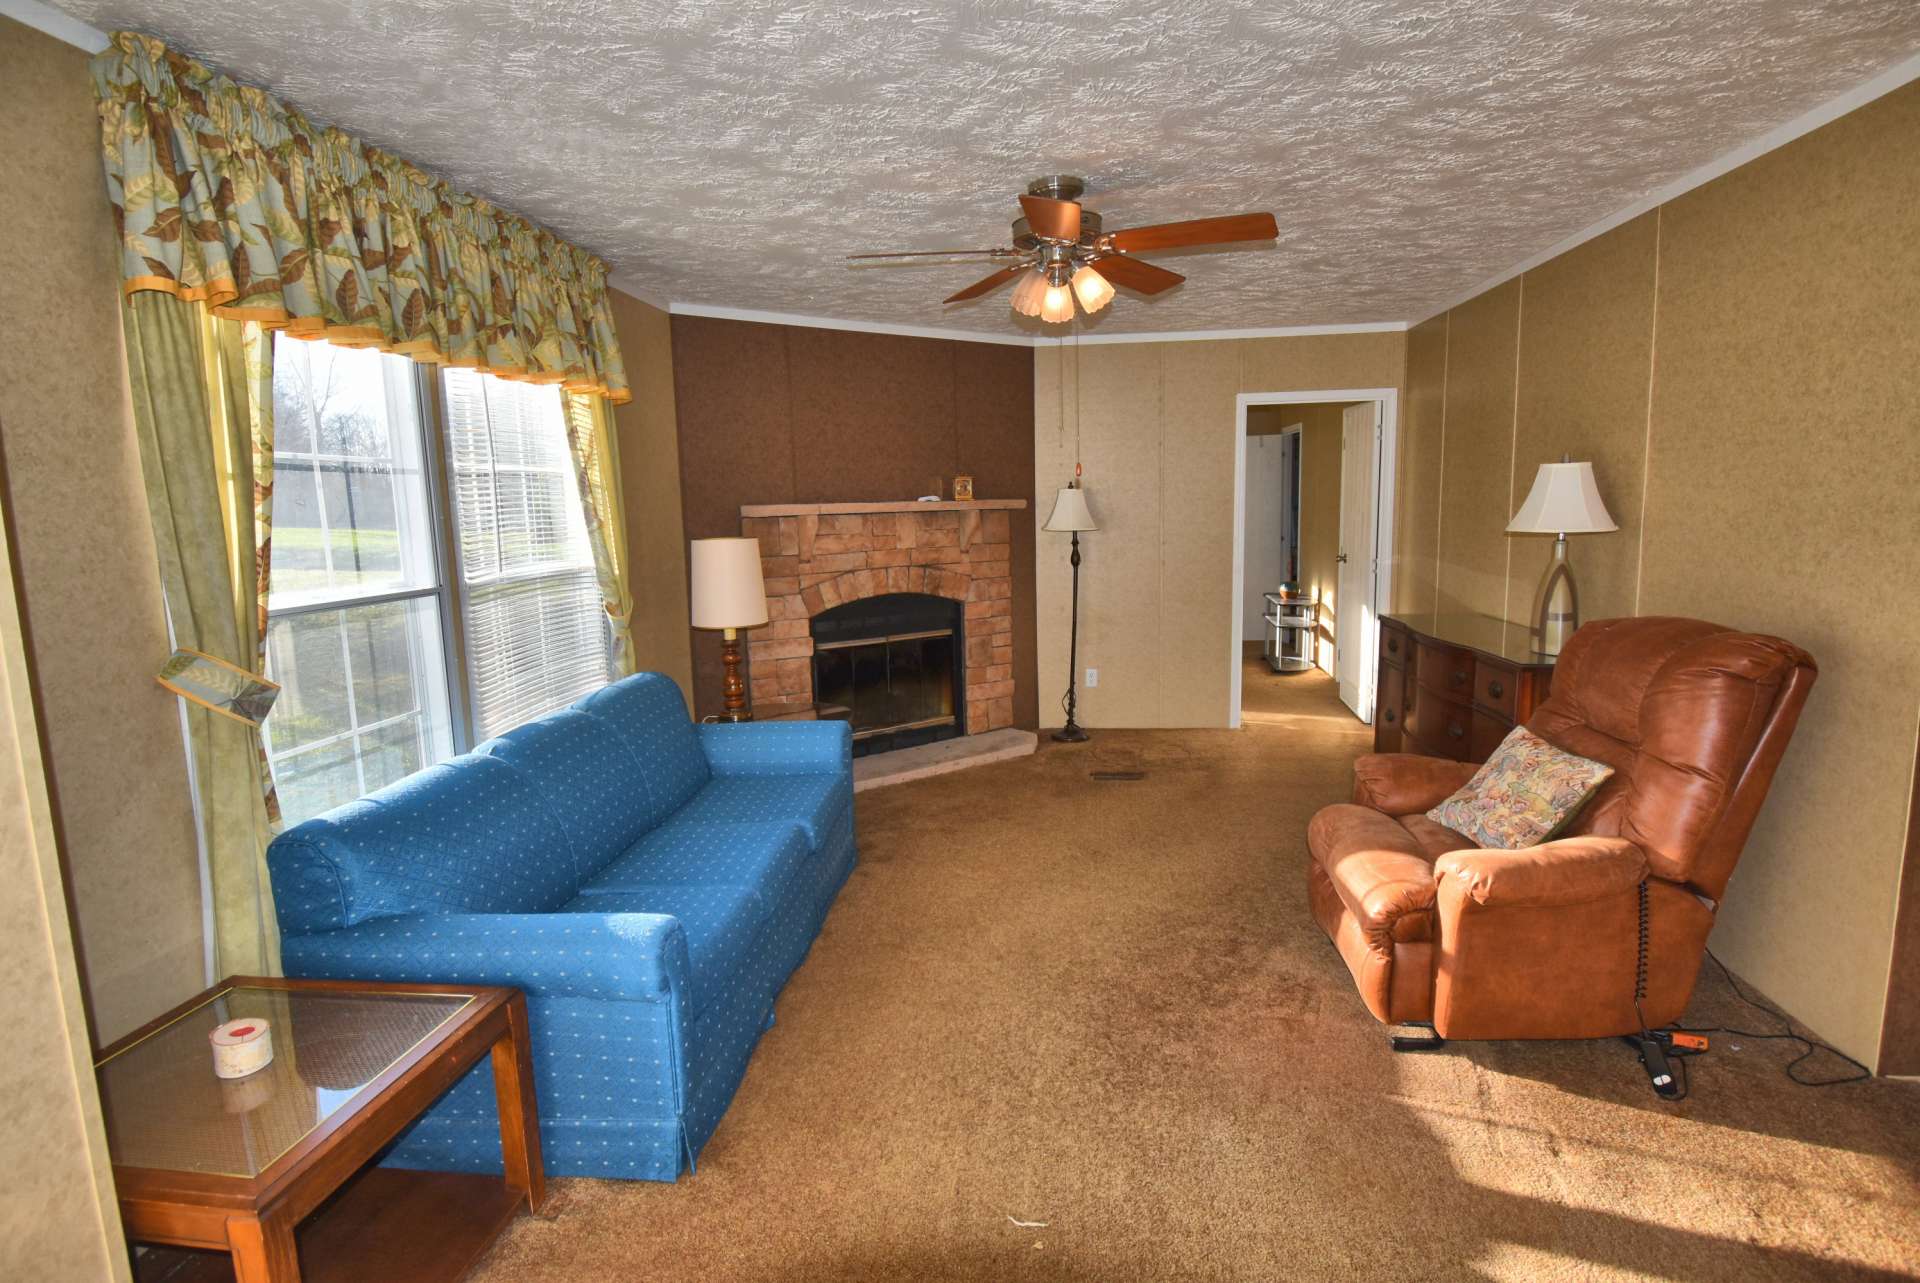 The spacious living area features a fireplace, currently blocked, but can be opened back up for use if desired.